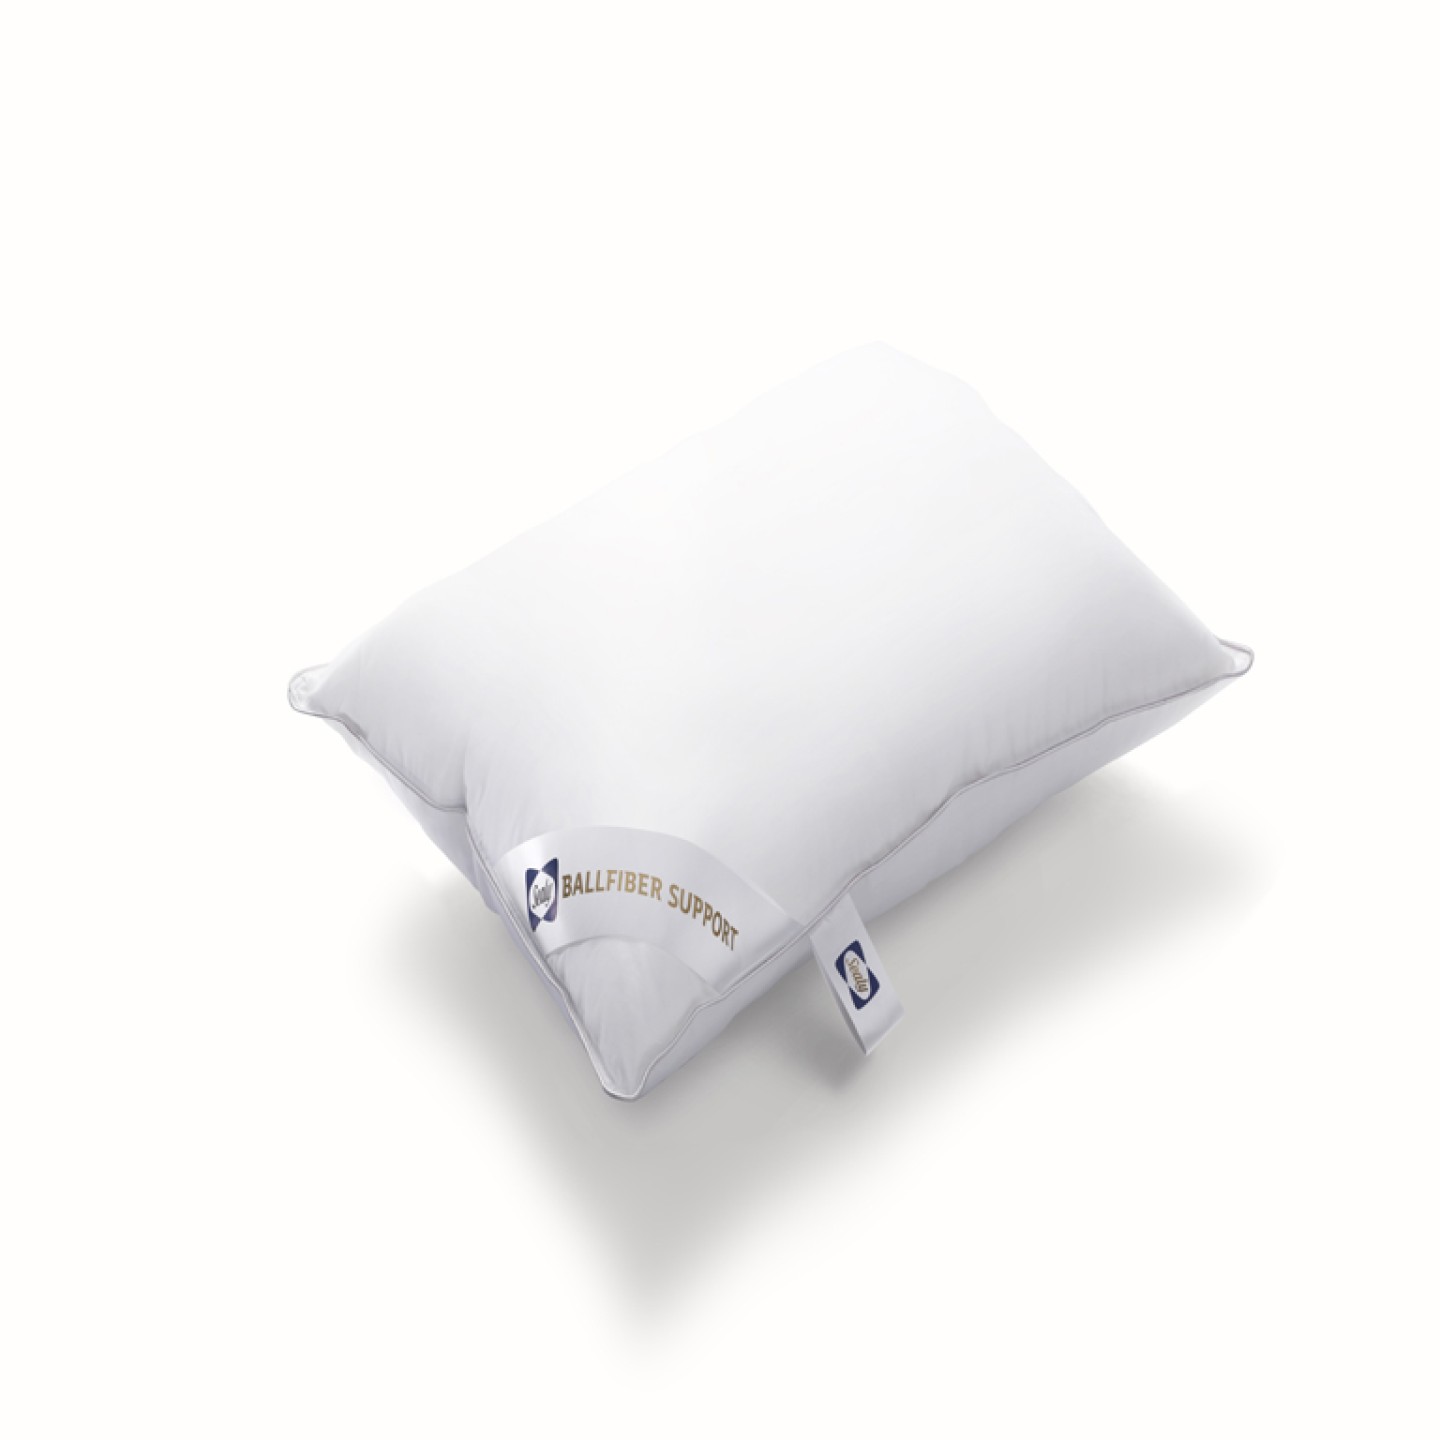 THE BALLFIBER SUPPORT PILLOW by Sealy